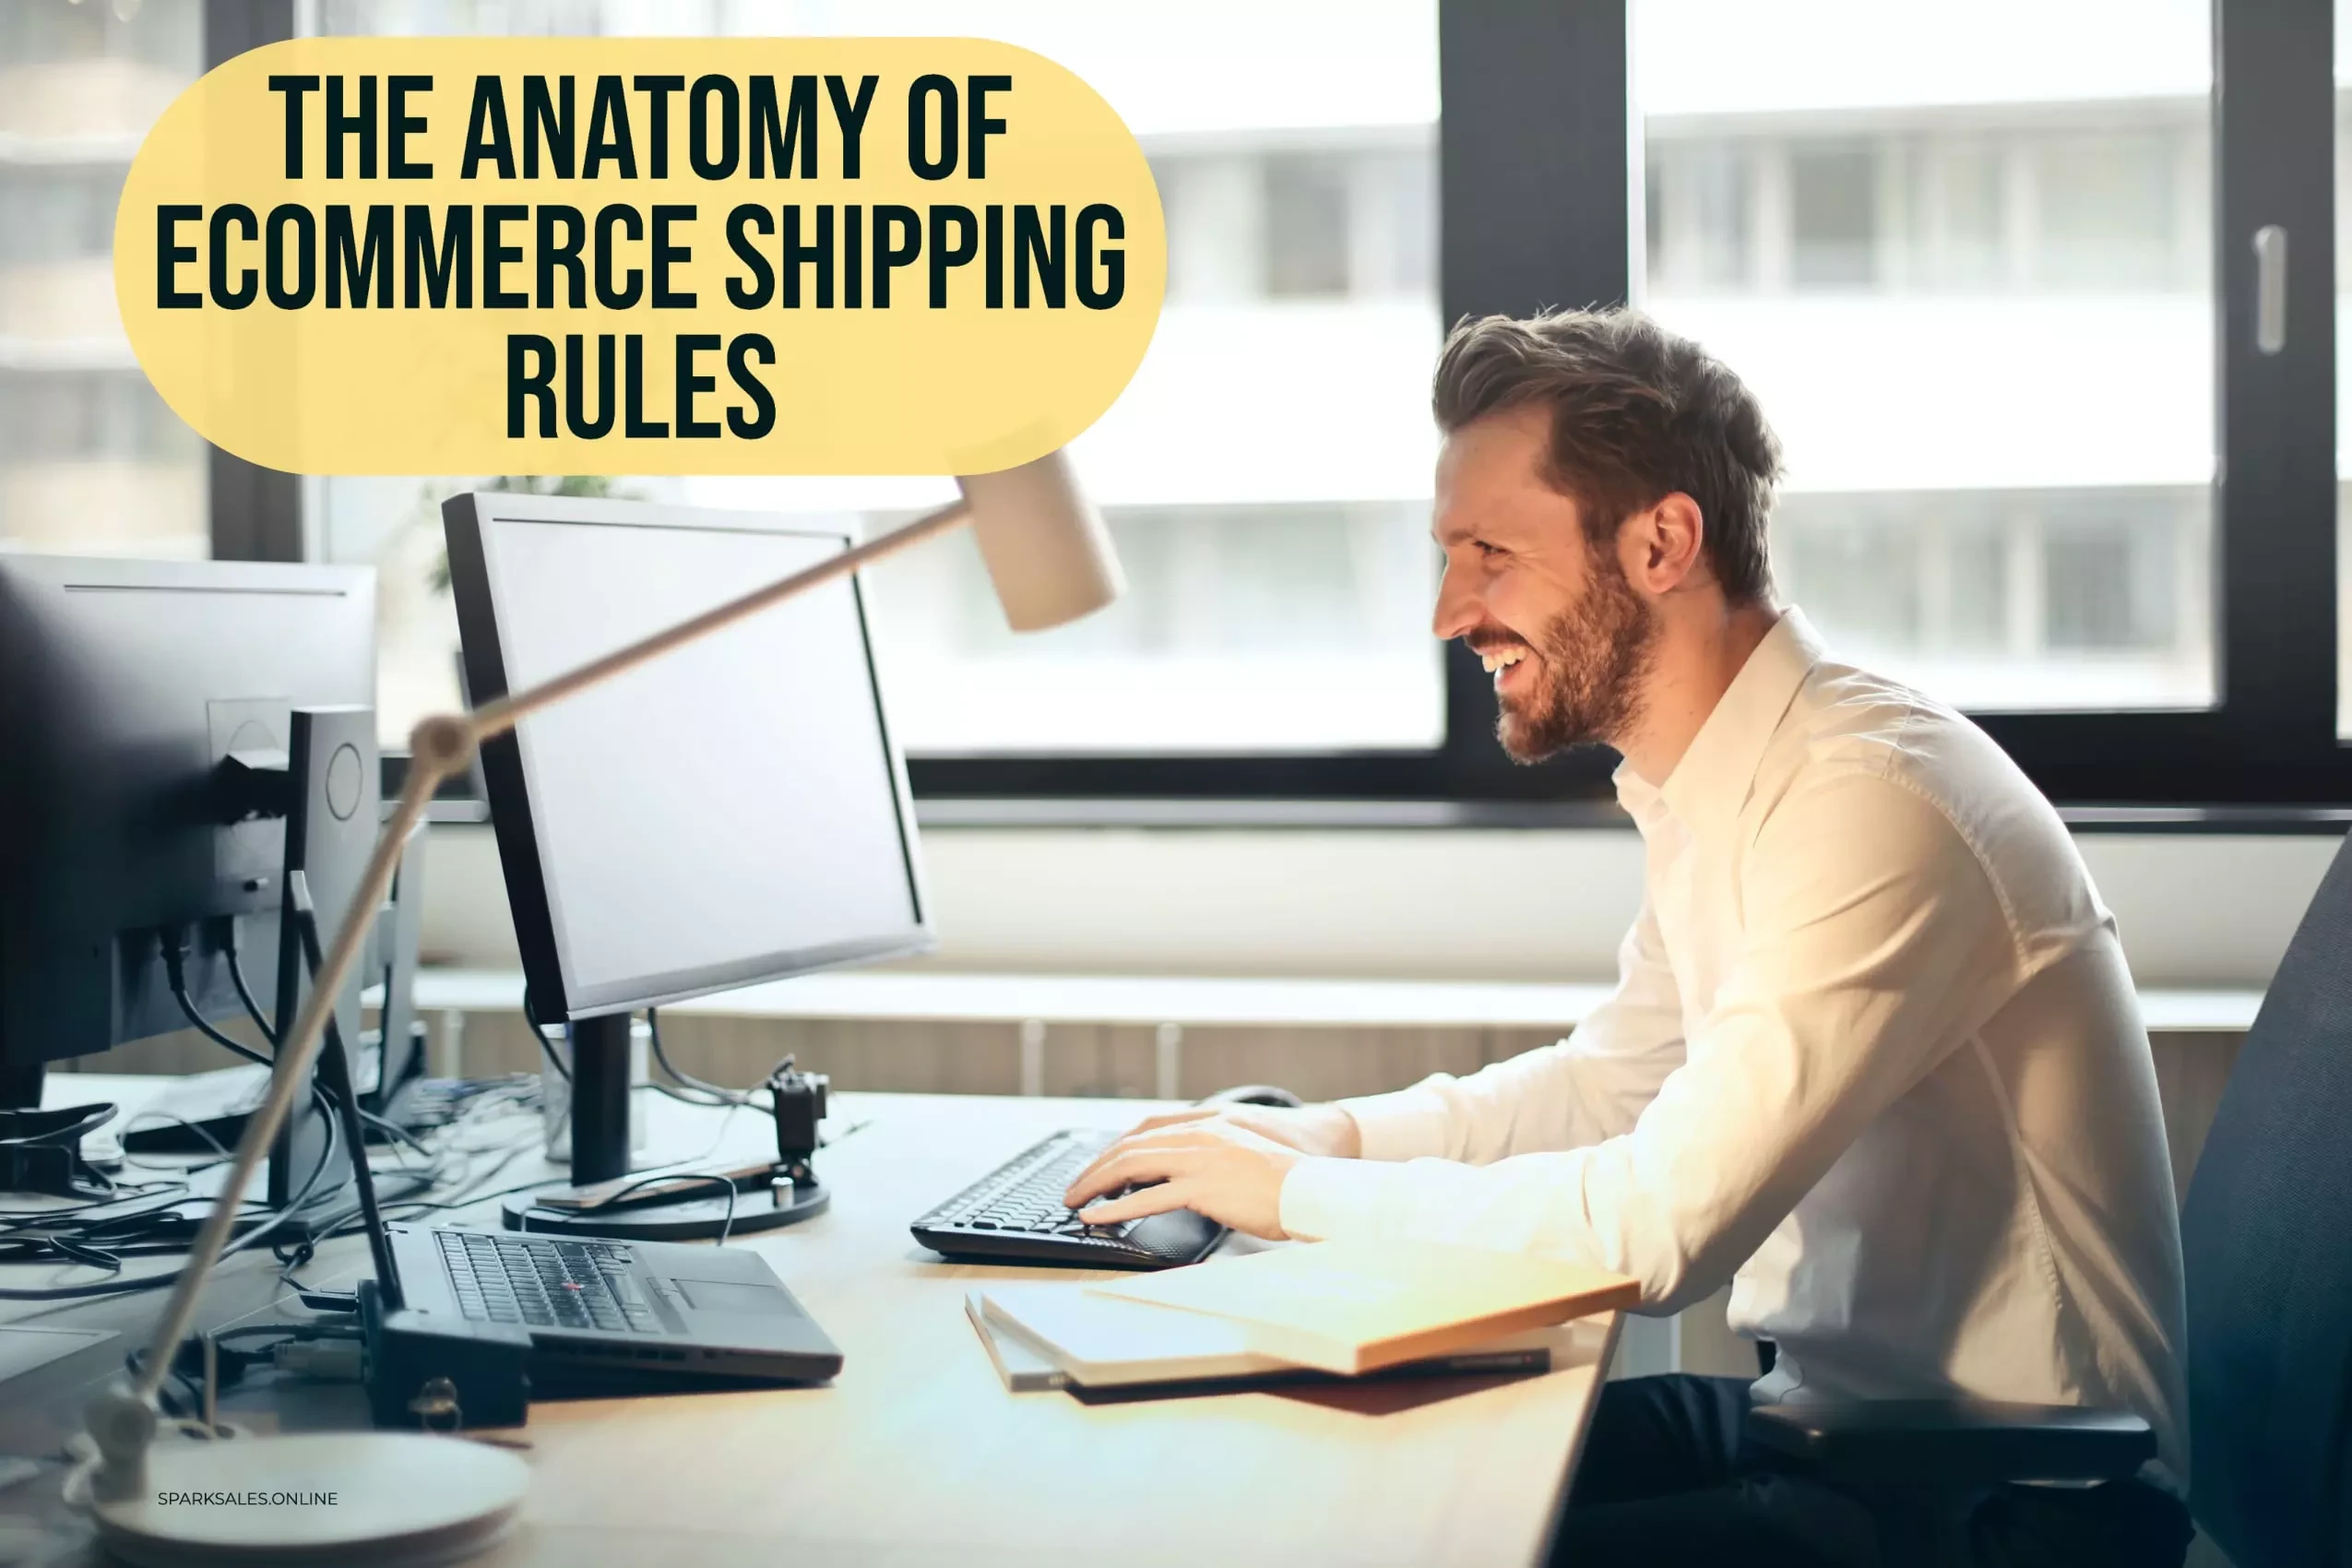 The Anatomy of Ecommerce Shipping Rules